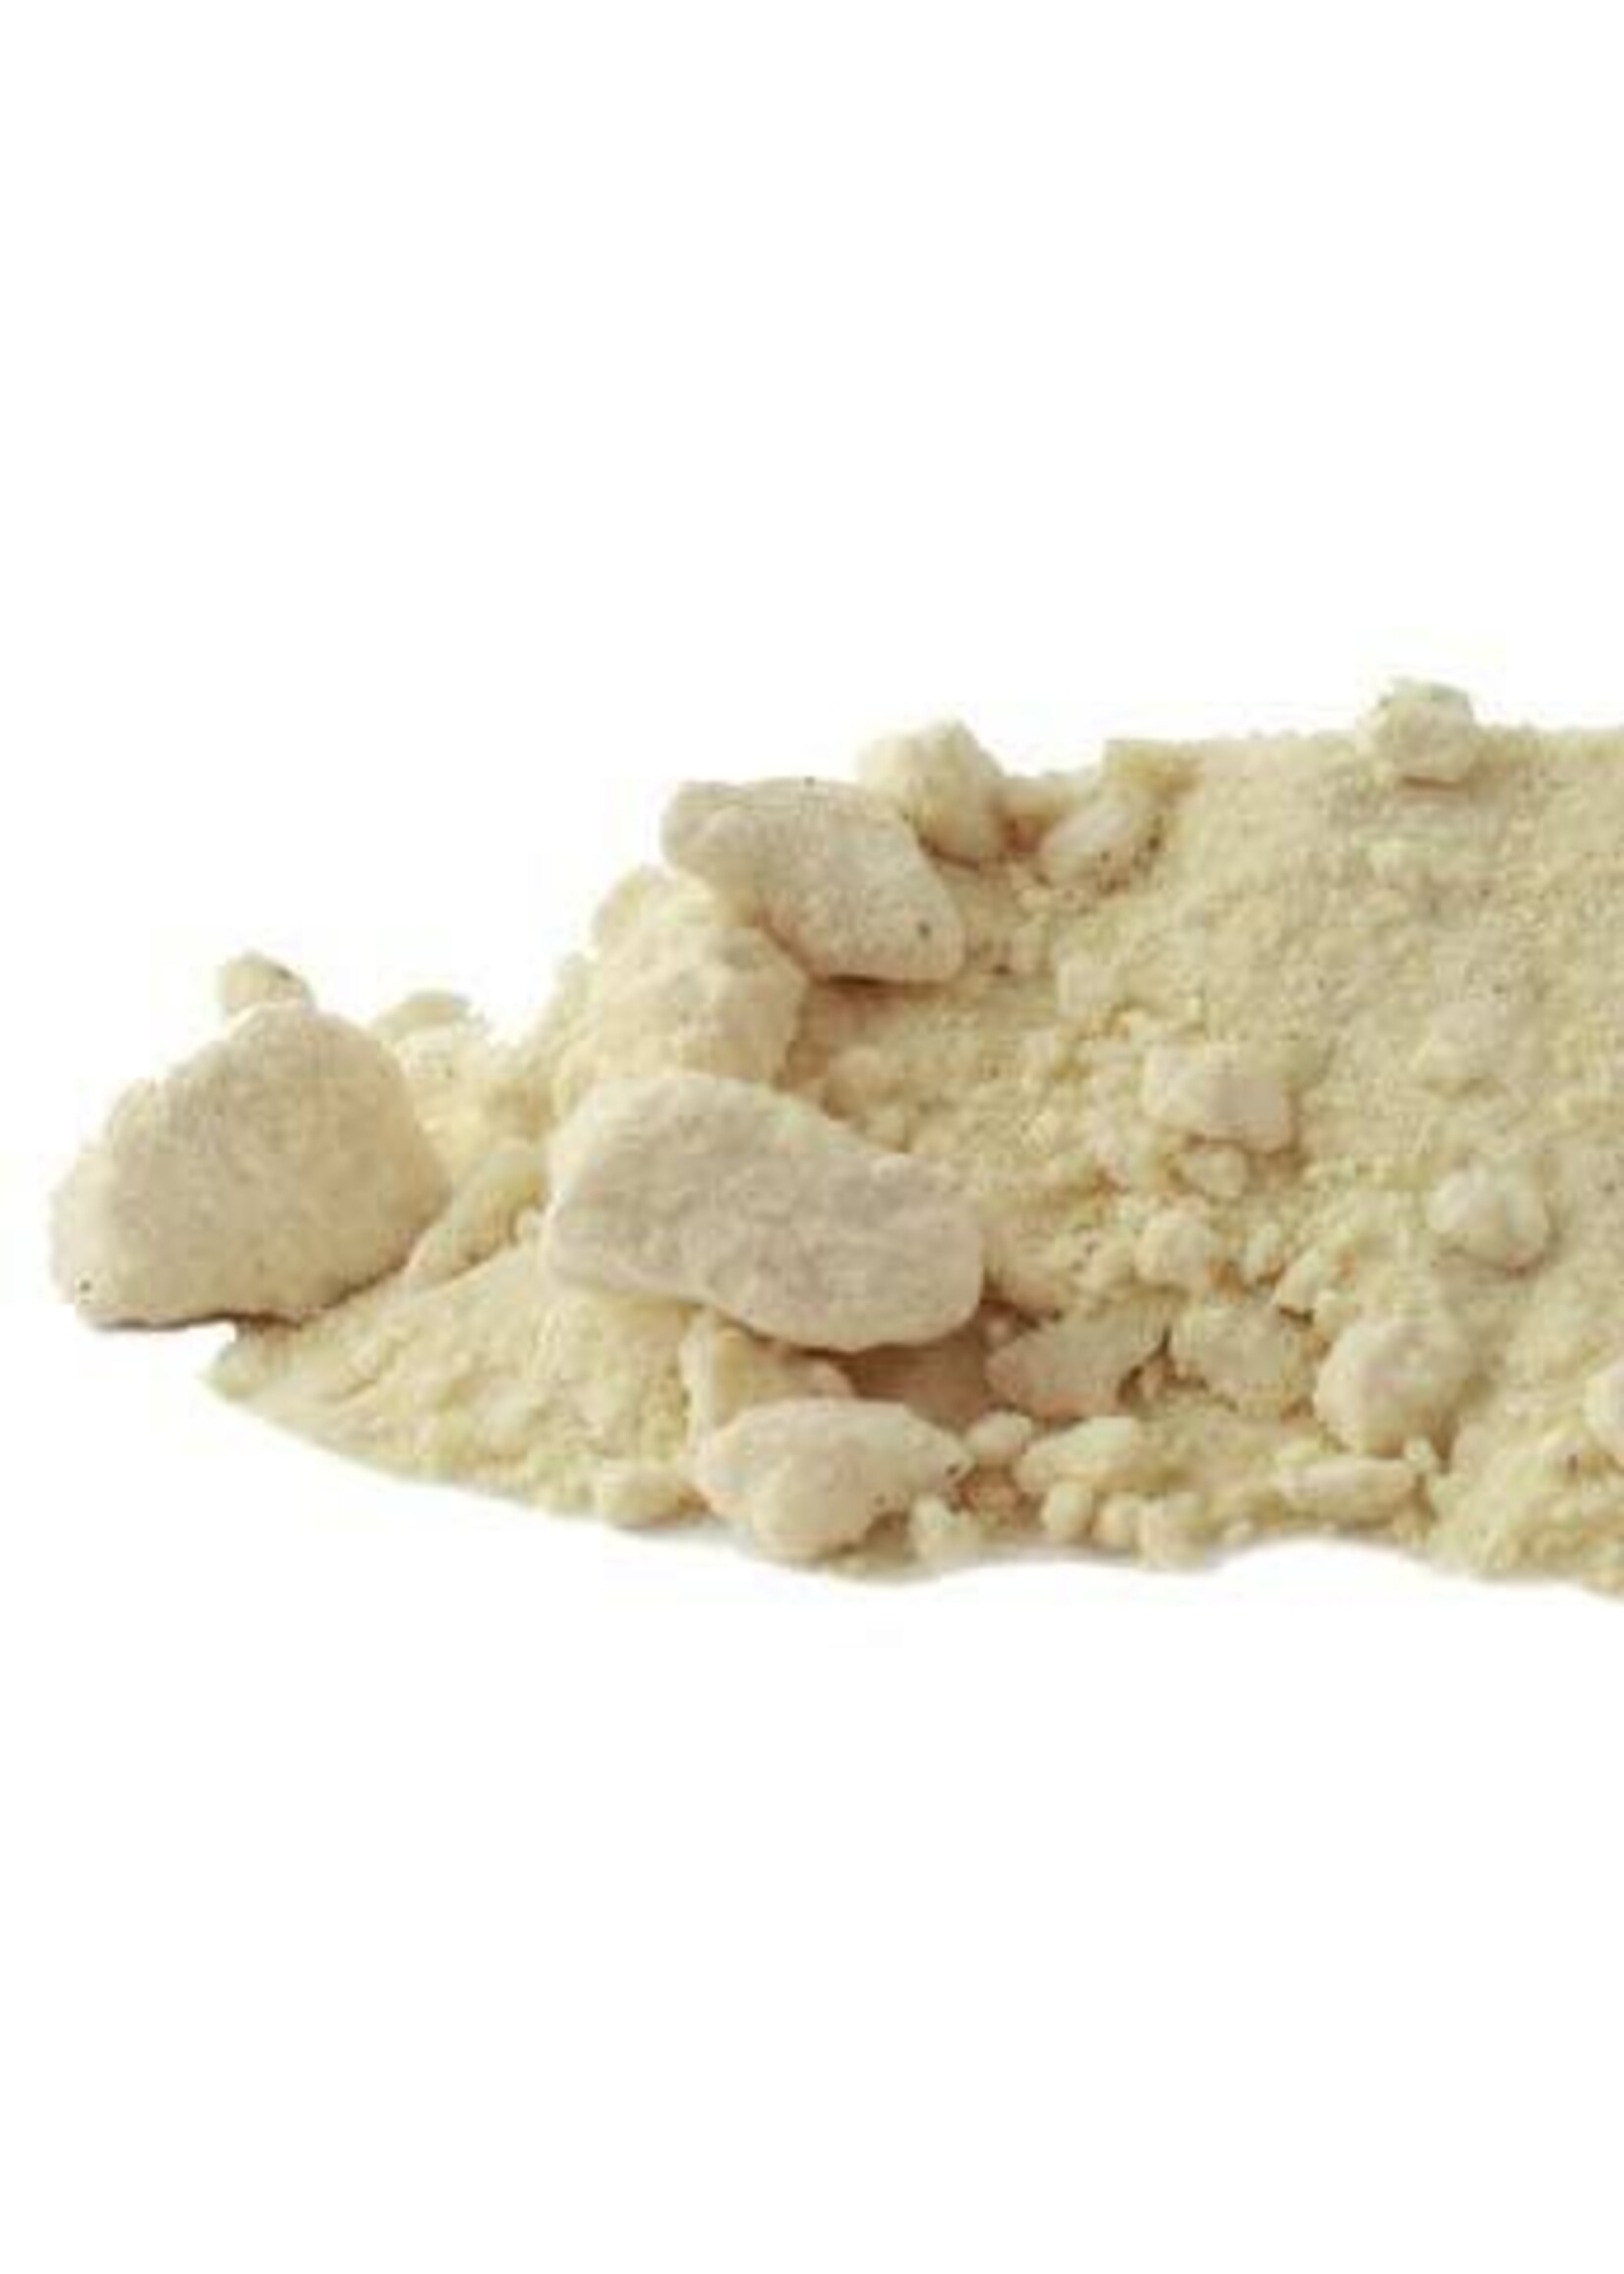 Wildharvested Frankincense Resin, Powder Sold Per Ounce